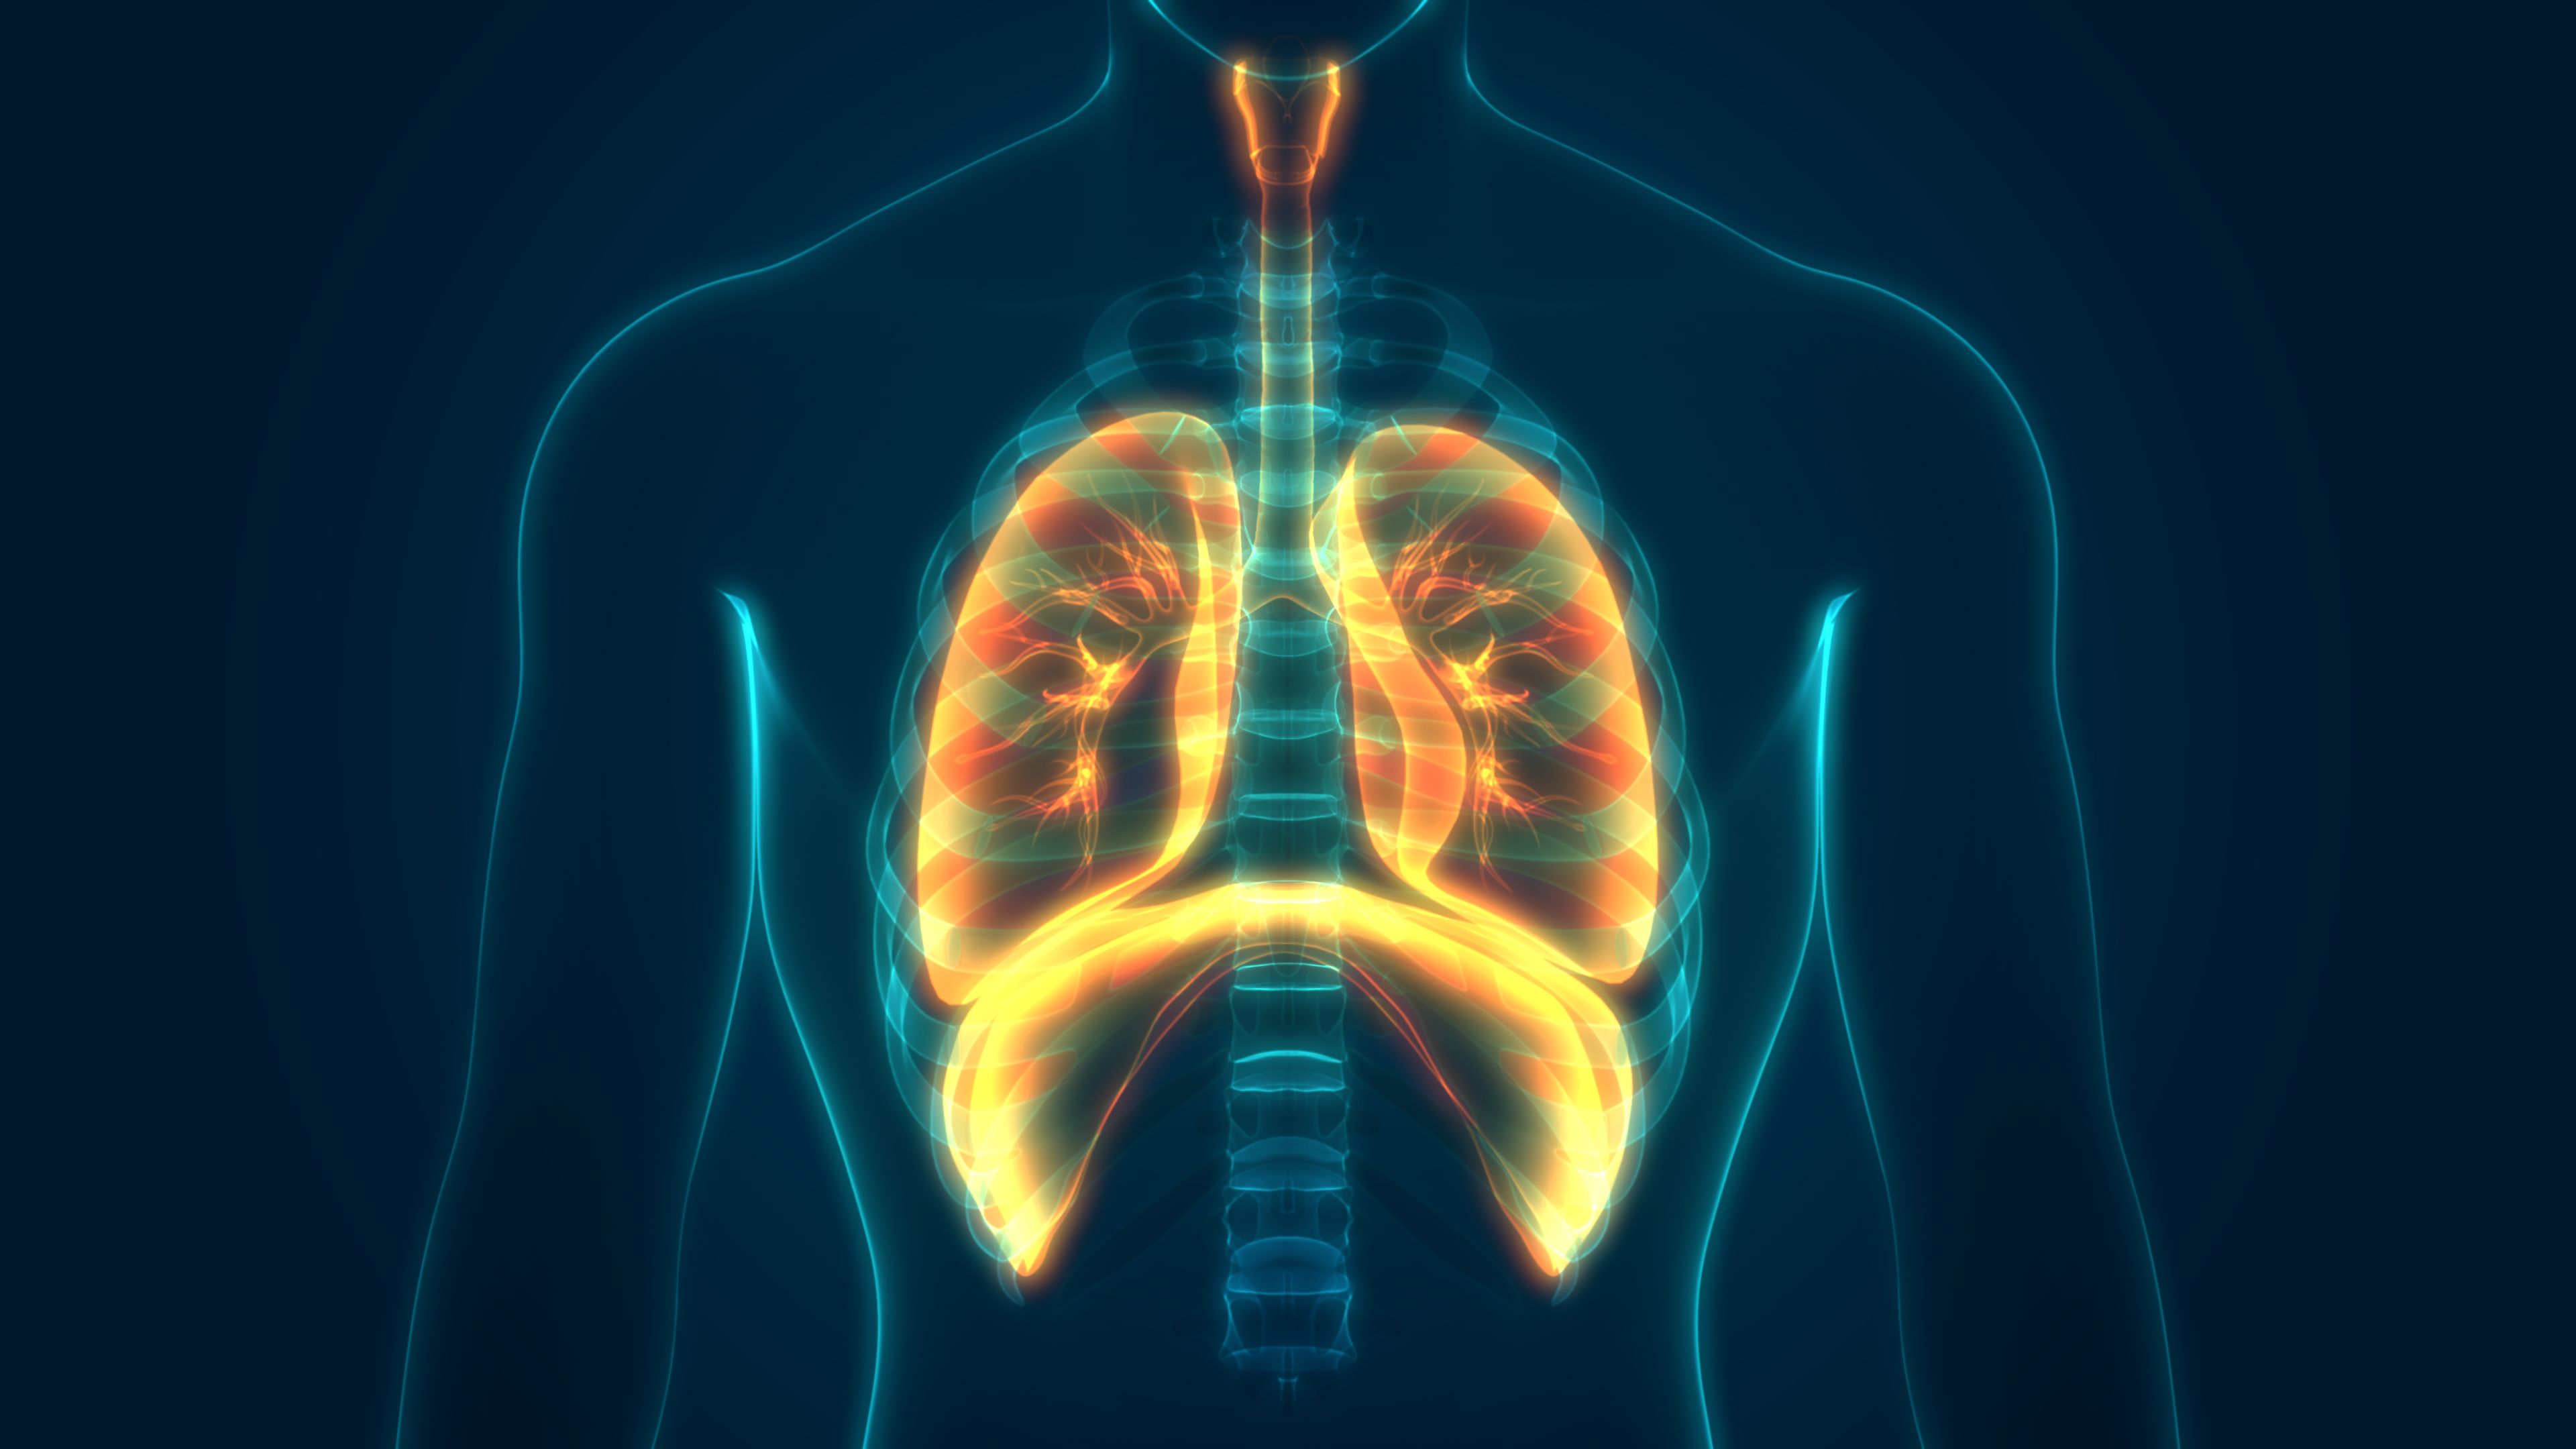 Respiratory Disease Imaging Market By Type (X-Ray, Magnetic Resonance Imaging (MRI), Computed Tomography (CT) Scan, and Nuclear Imaging), By Disease Indication (Chronic Obstructive Pulmonary Disease, Lung Cancer, Asthma, Tuberculosis, and Others) - Global Outlook & Forecast 2022-2030